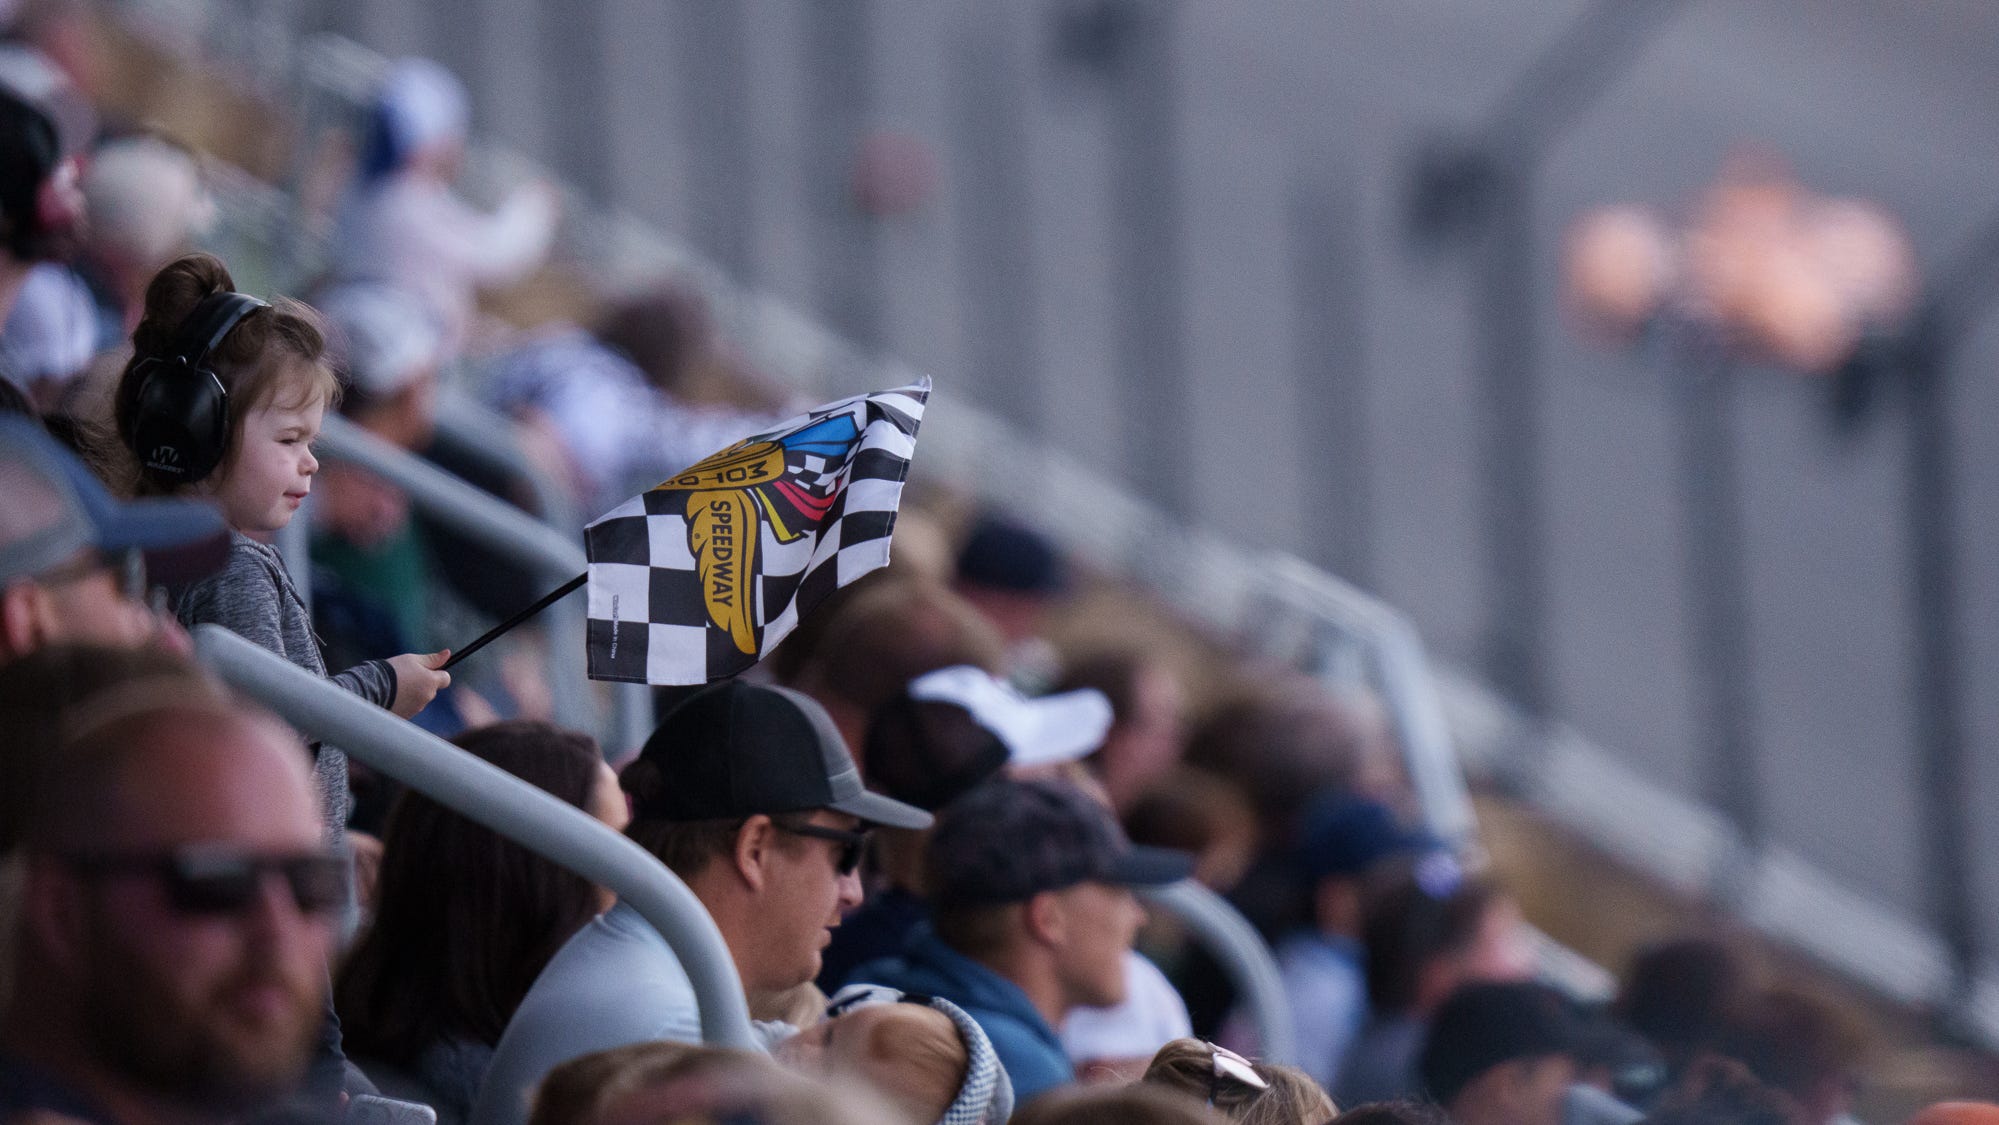 Will the Indy 500 be blacked out in 2022? Here's what seems likely.